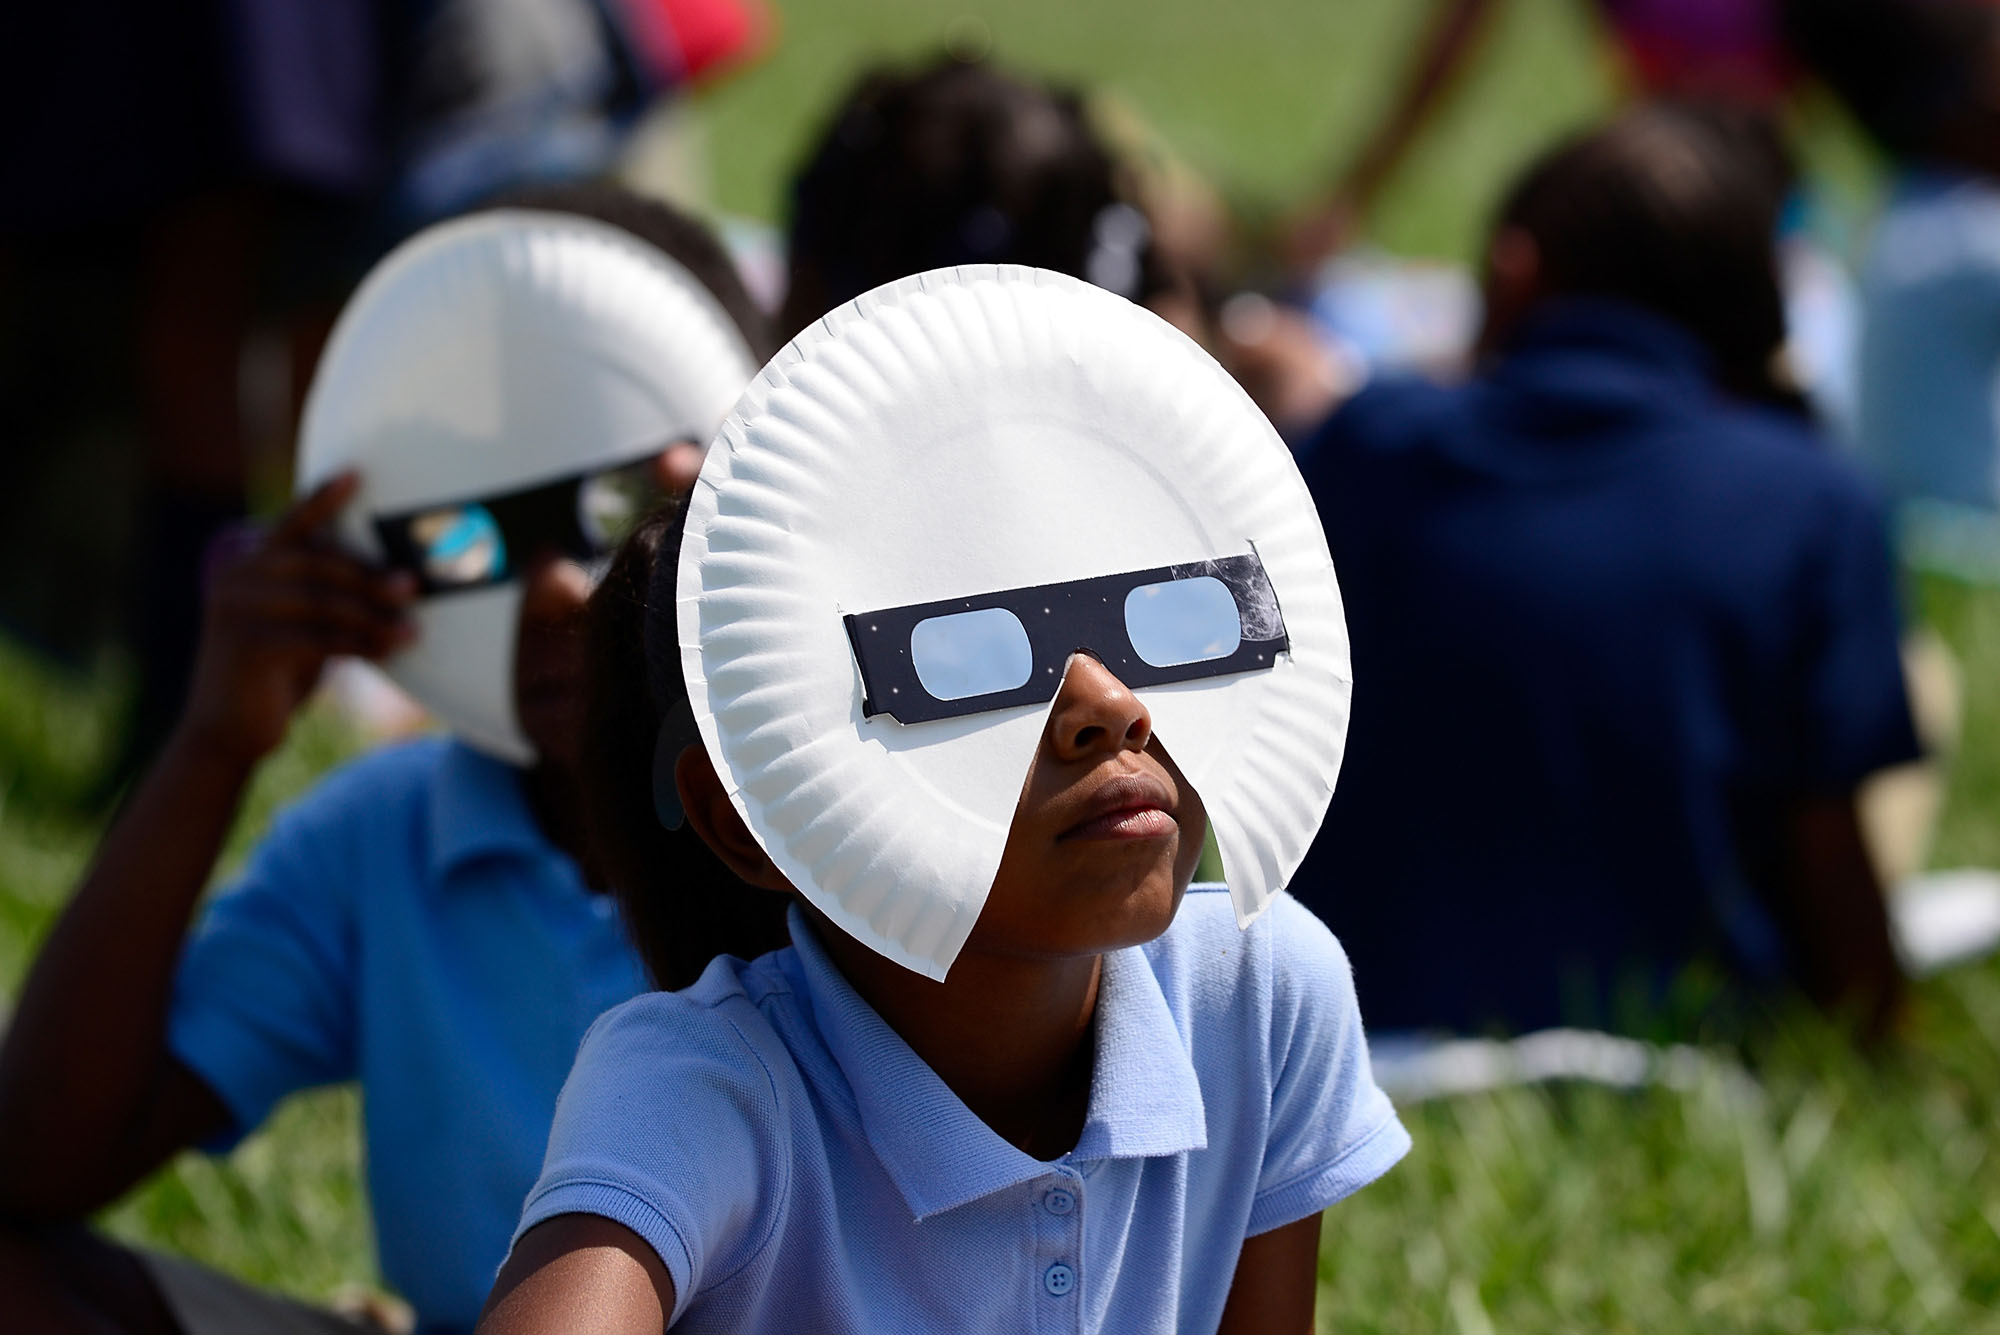 Students of the Jennings School District view a solar eclipse on August 21, 2017